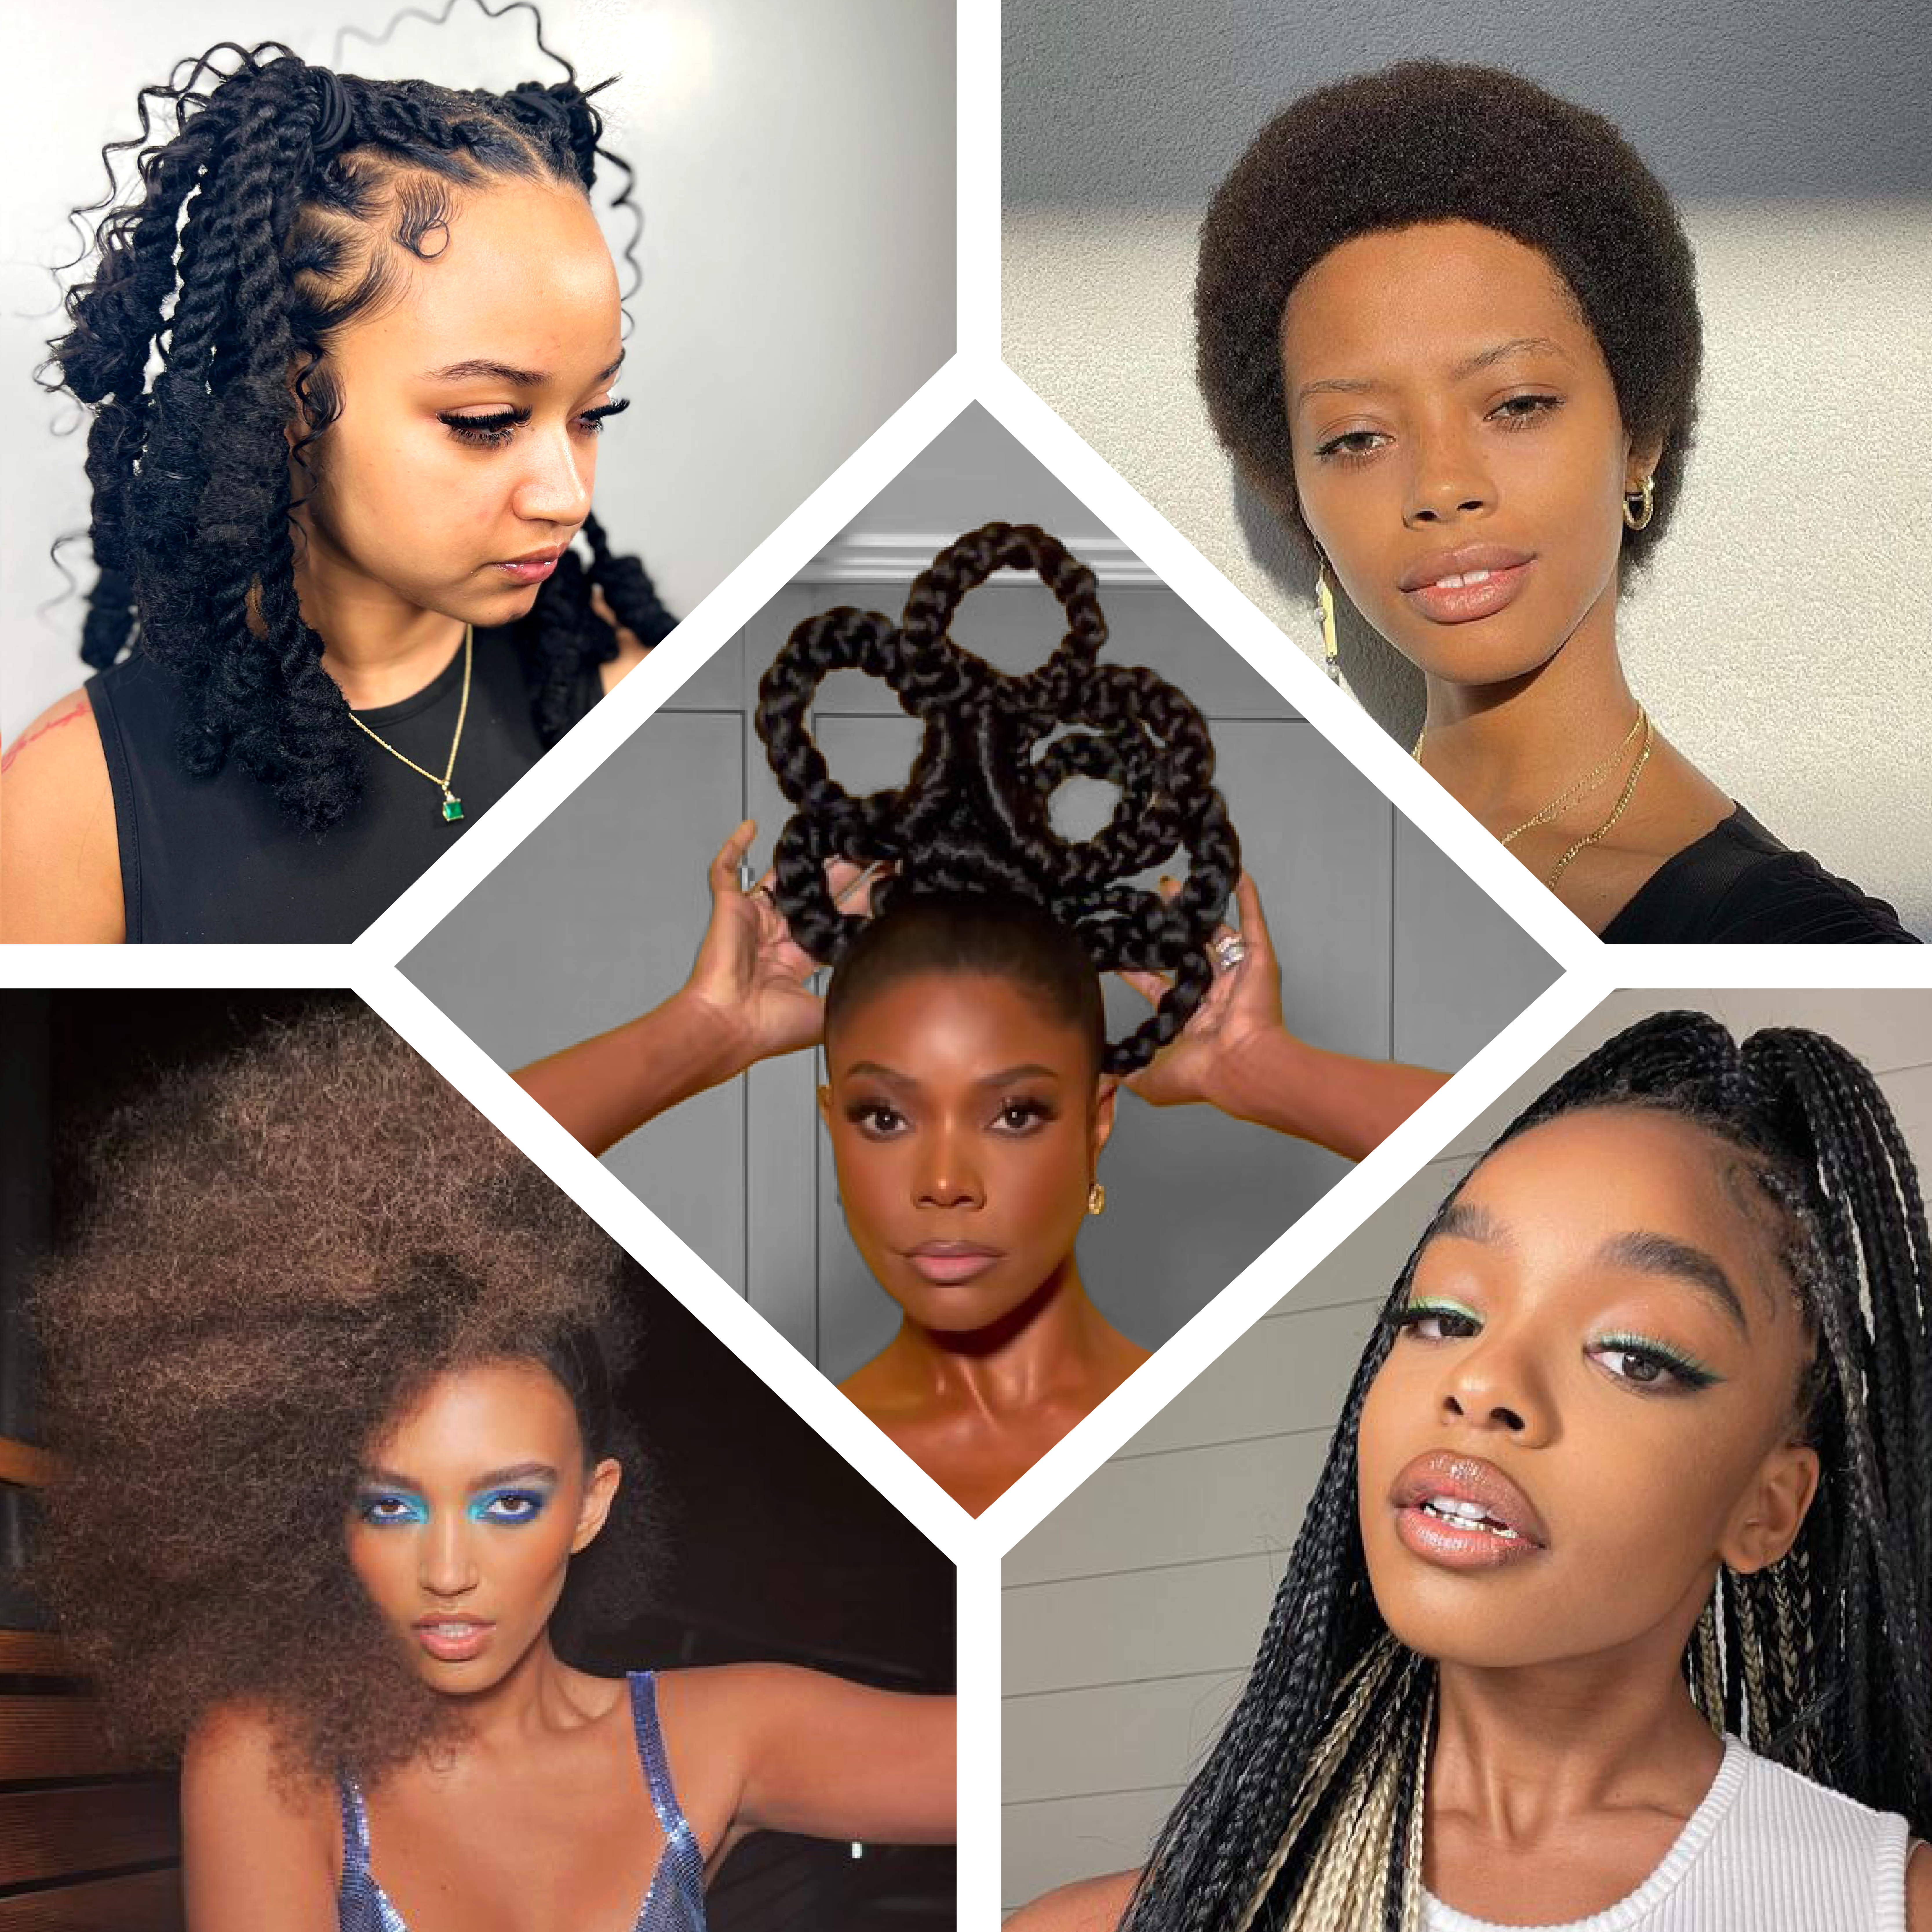 Stunning African Thread Hairstyles You Need to Try This Season  Natural  hair braids, African hairstyles, African hair braiding styles